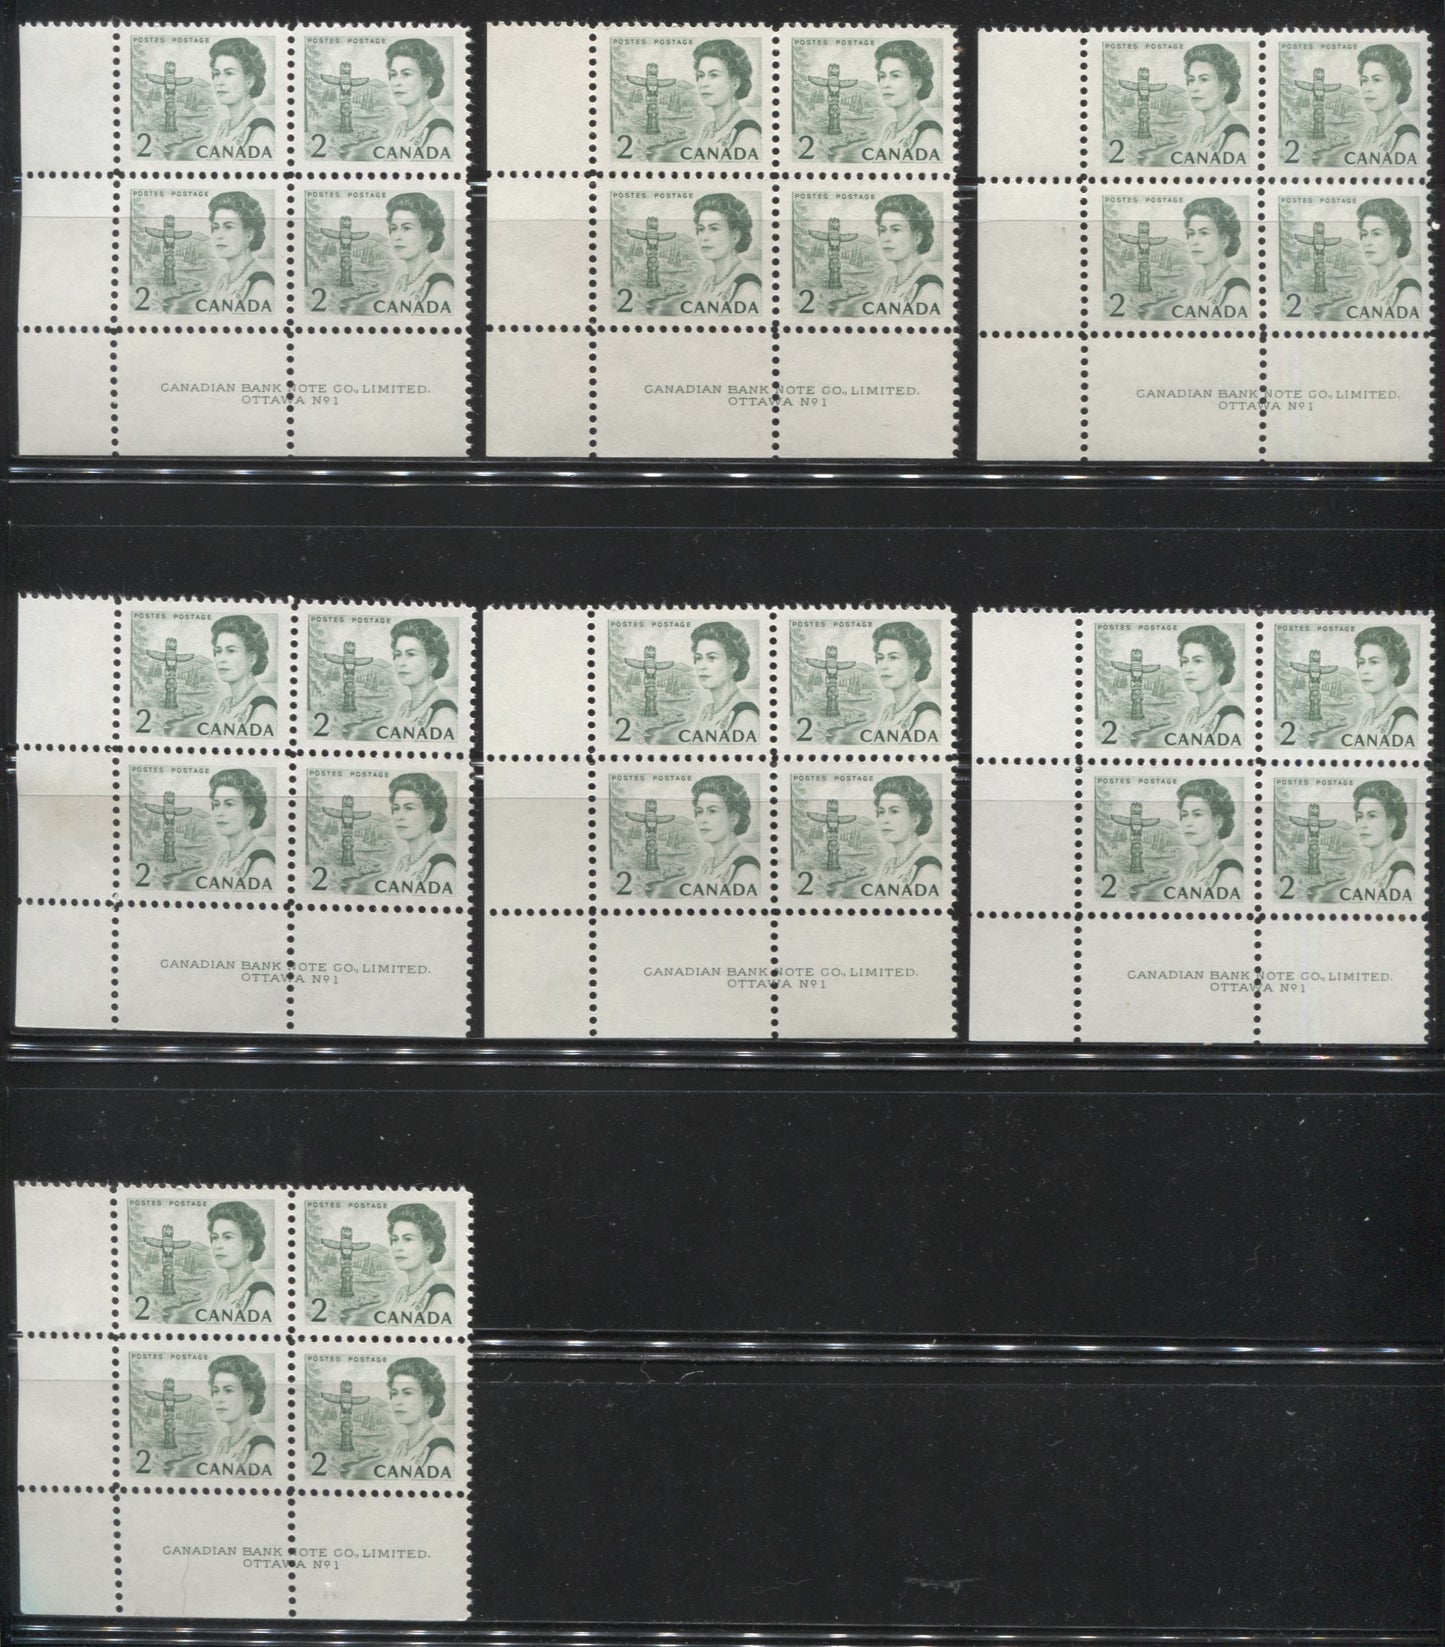 Lot #156 Canada #455, 455iv 2c Green, Bright Green & Deep Bright Green, Pacific Coast Totem Pole, 1967-1973 Centennial Issue, A Specialized Lot of Plate 1 LL Blocks on DF and NF Papers